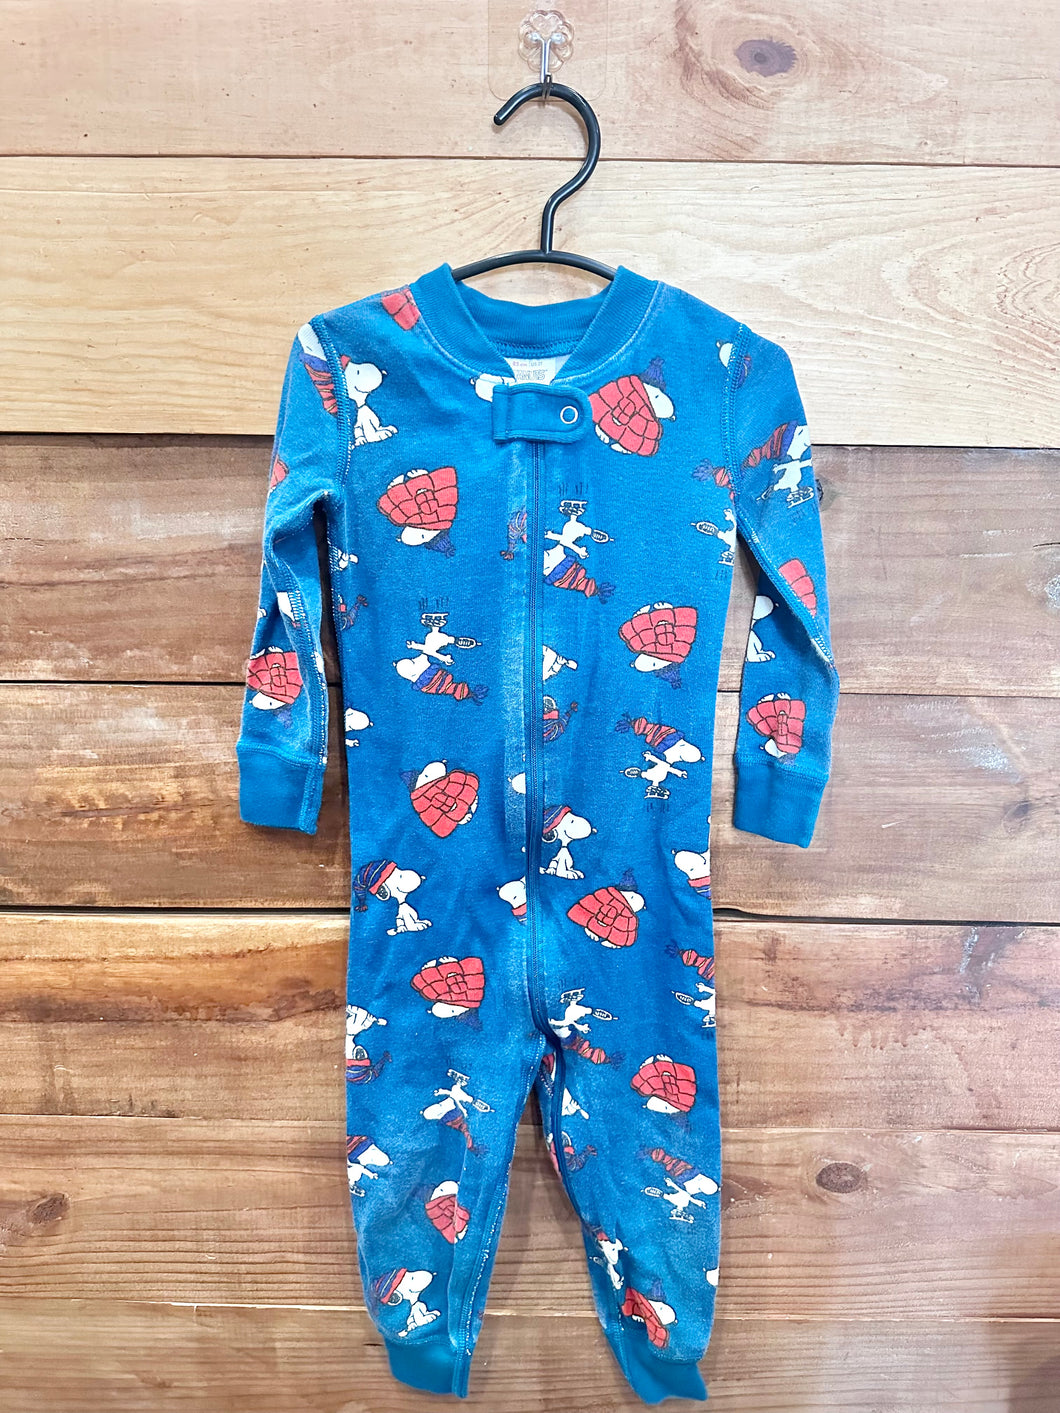 Hanna Andersson Blue Snoopy Sleeper Size 2T*